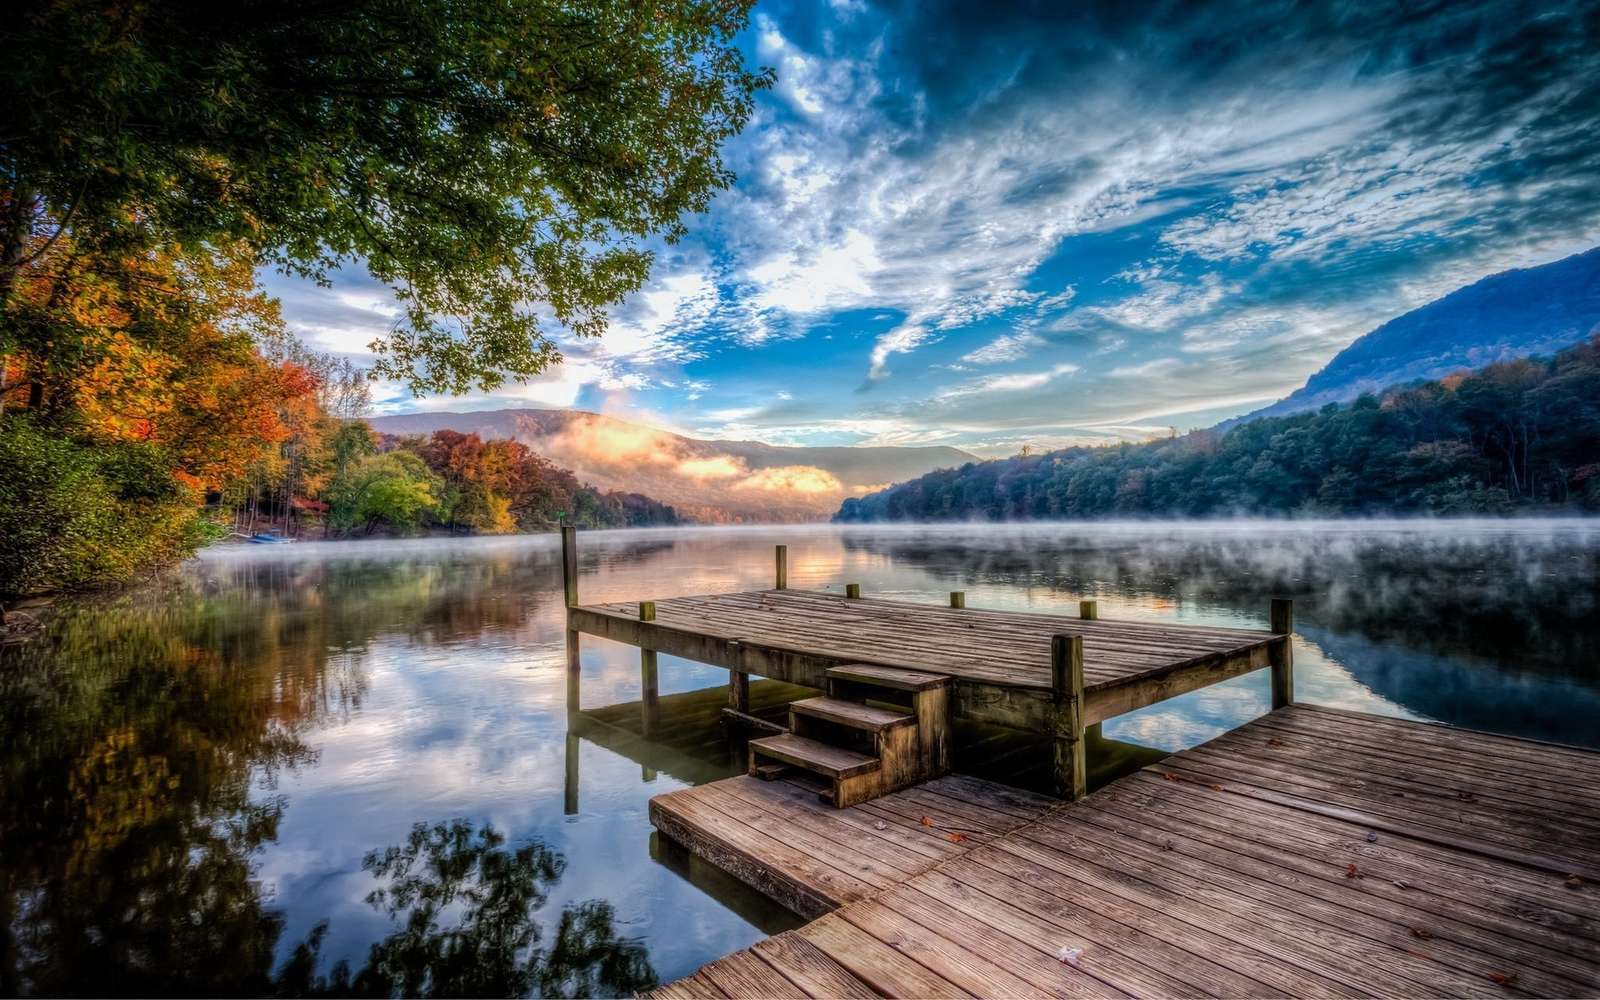 Beautiful Landscapes puzzle online from photo